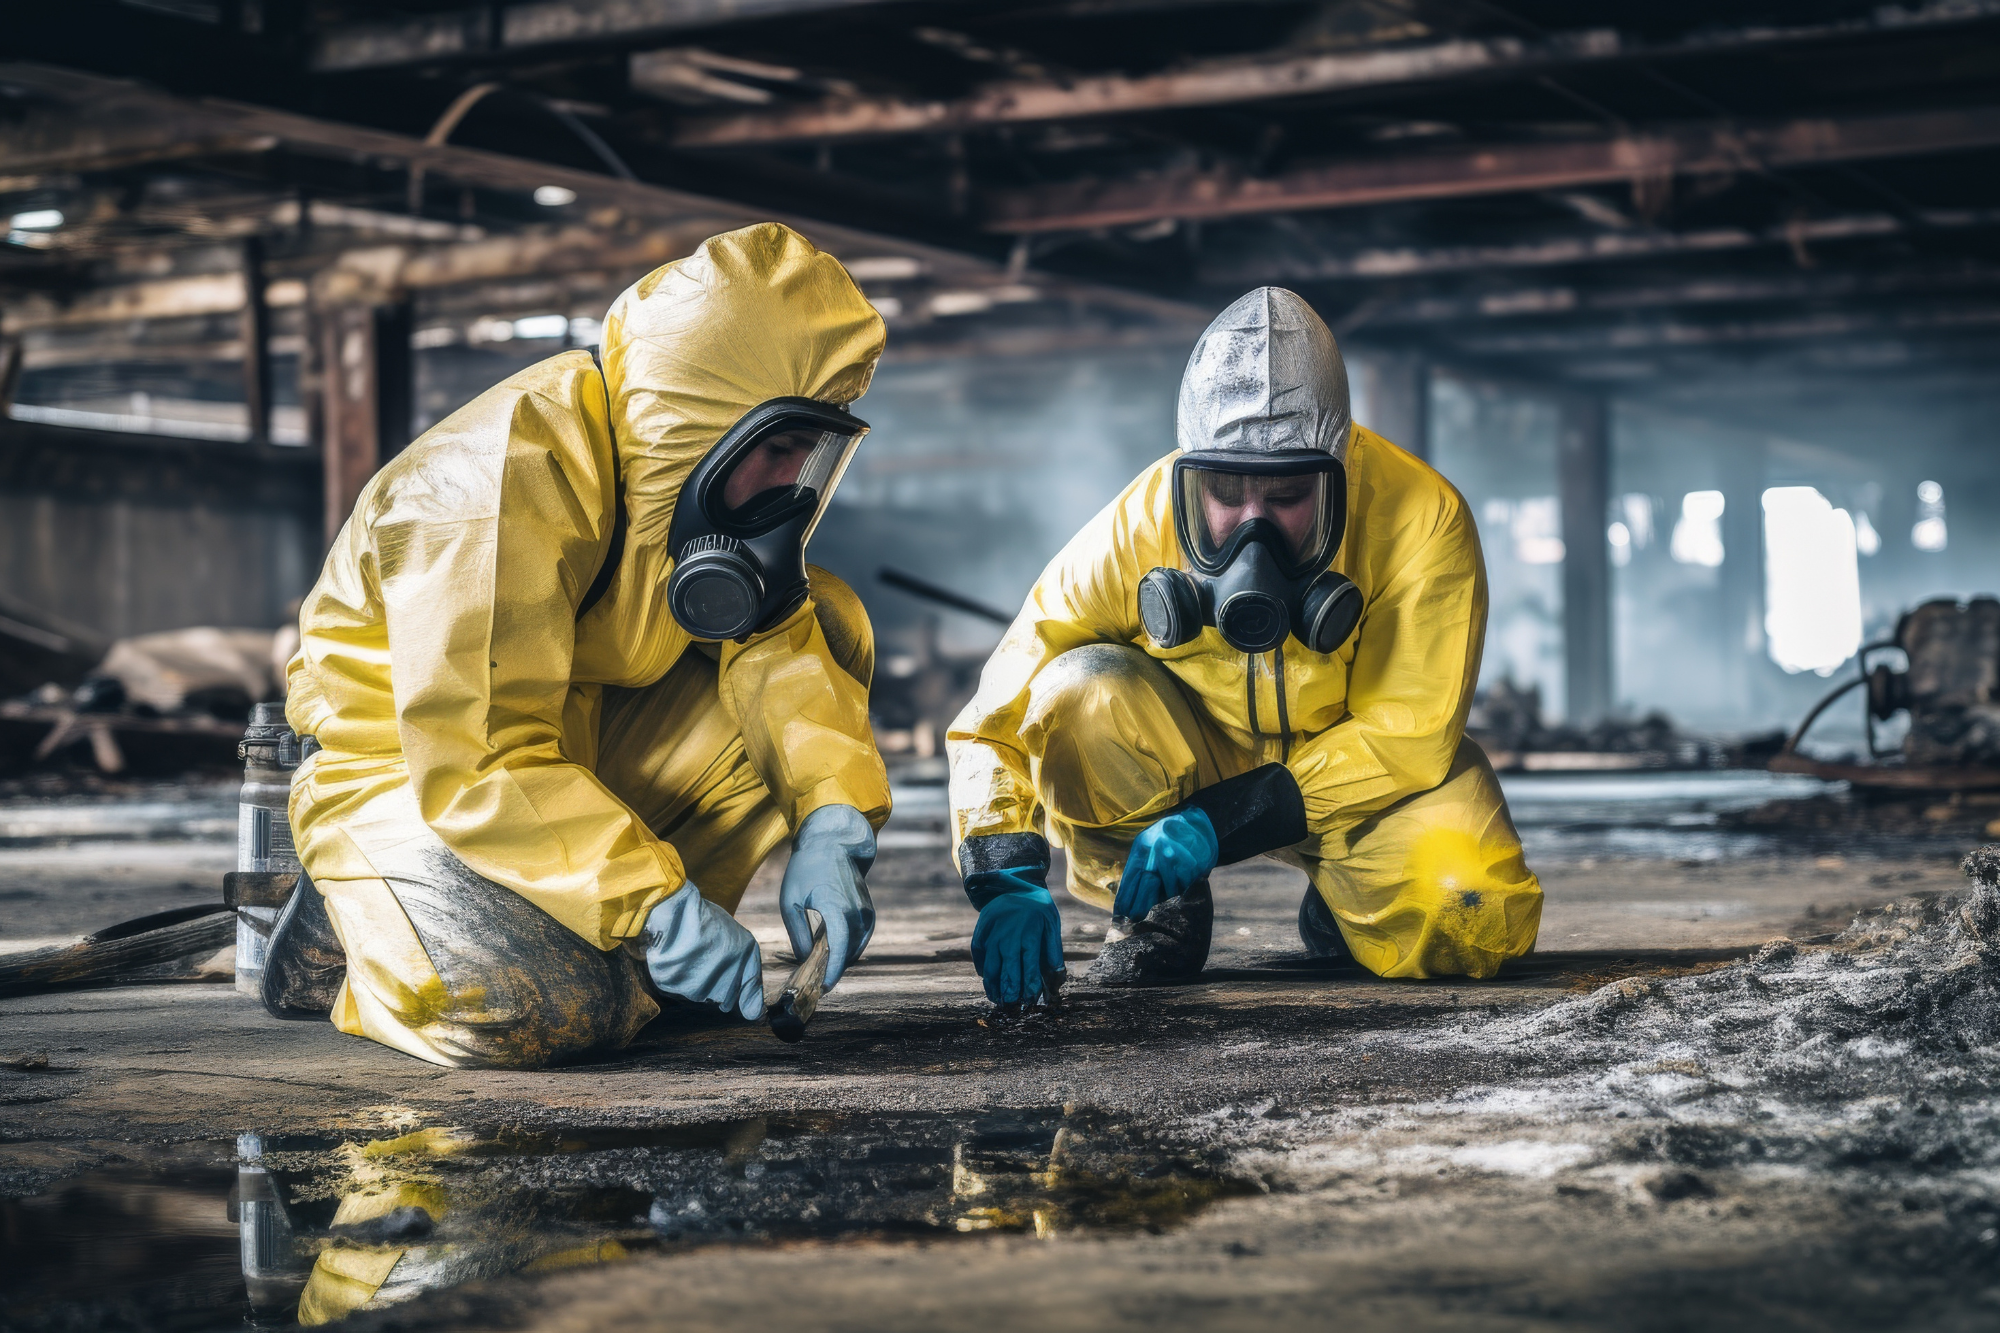 workers in safety gear evaluating a spill